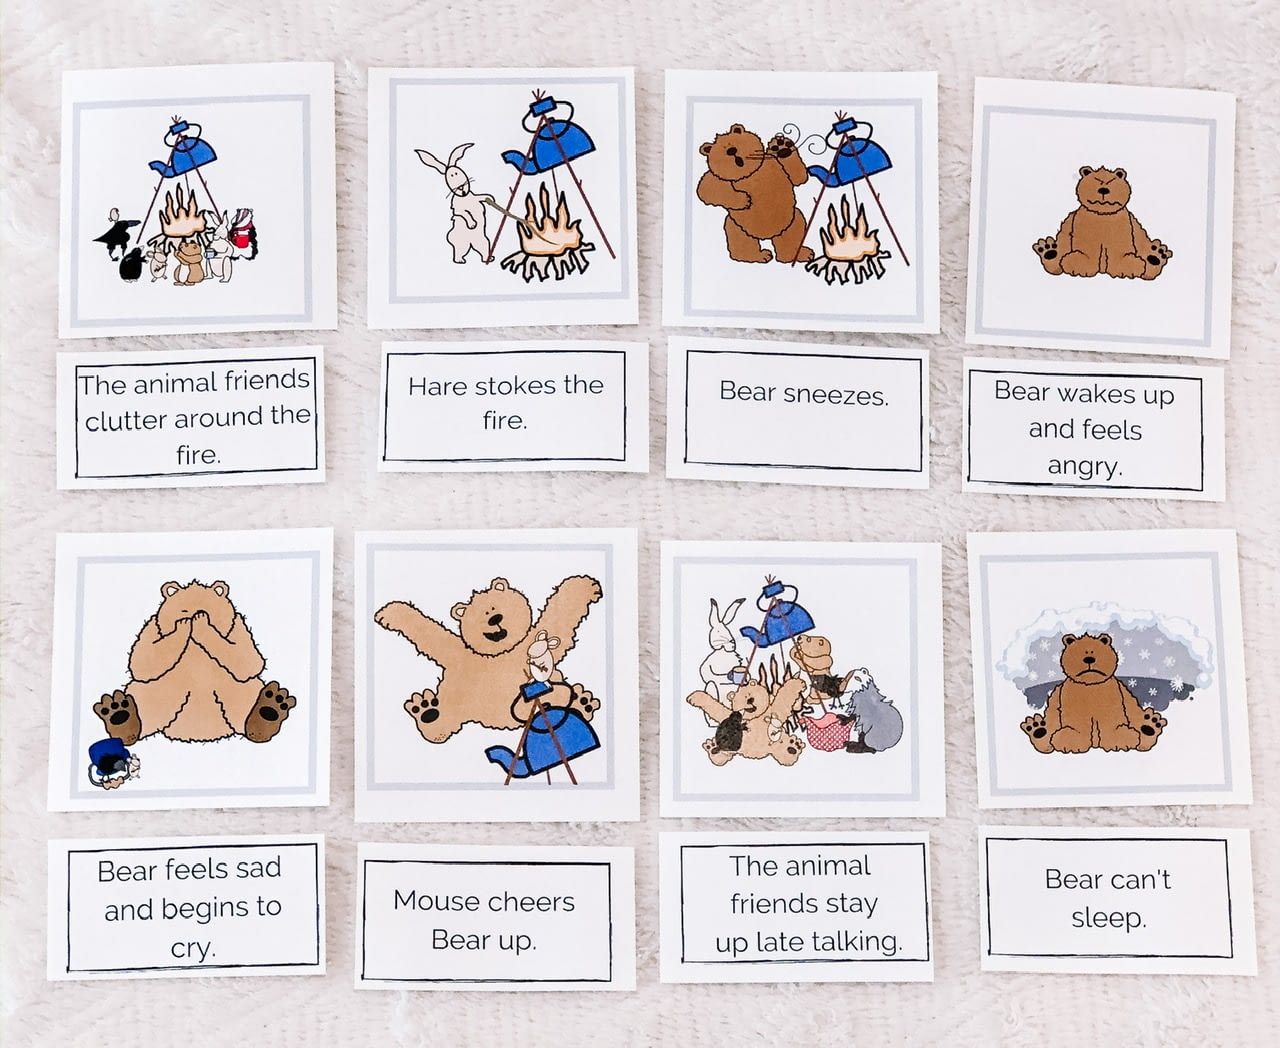 Download Bear Snores On Sequencing Cards Literacy Activity For Kids